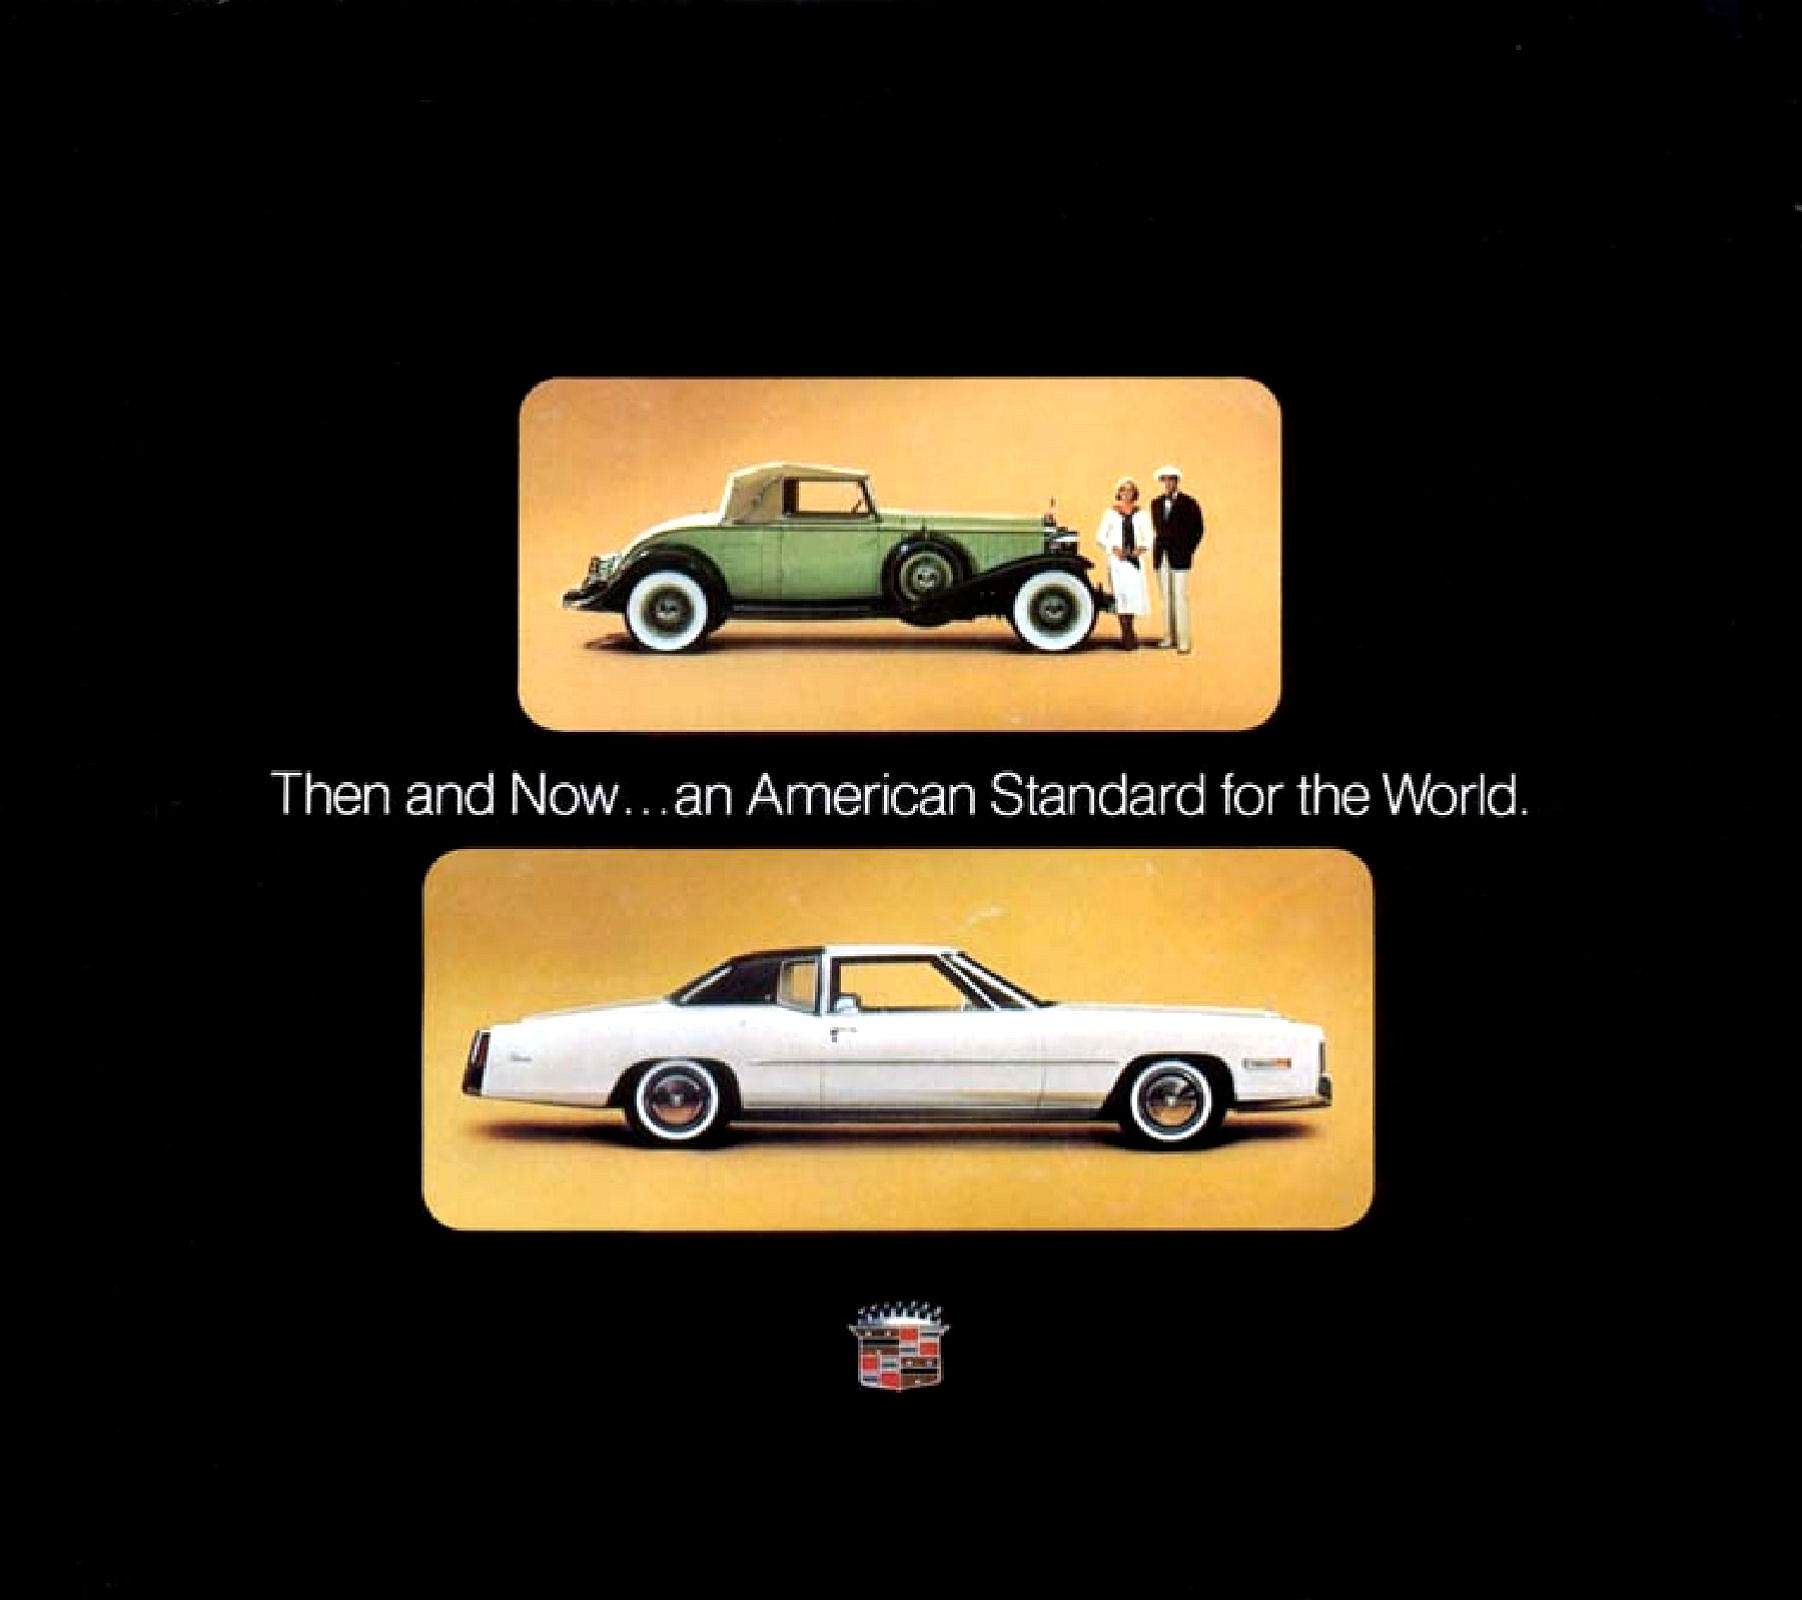 1975 Cadillac Then _ Now Mailer-01